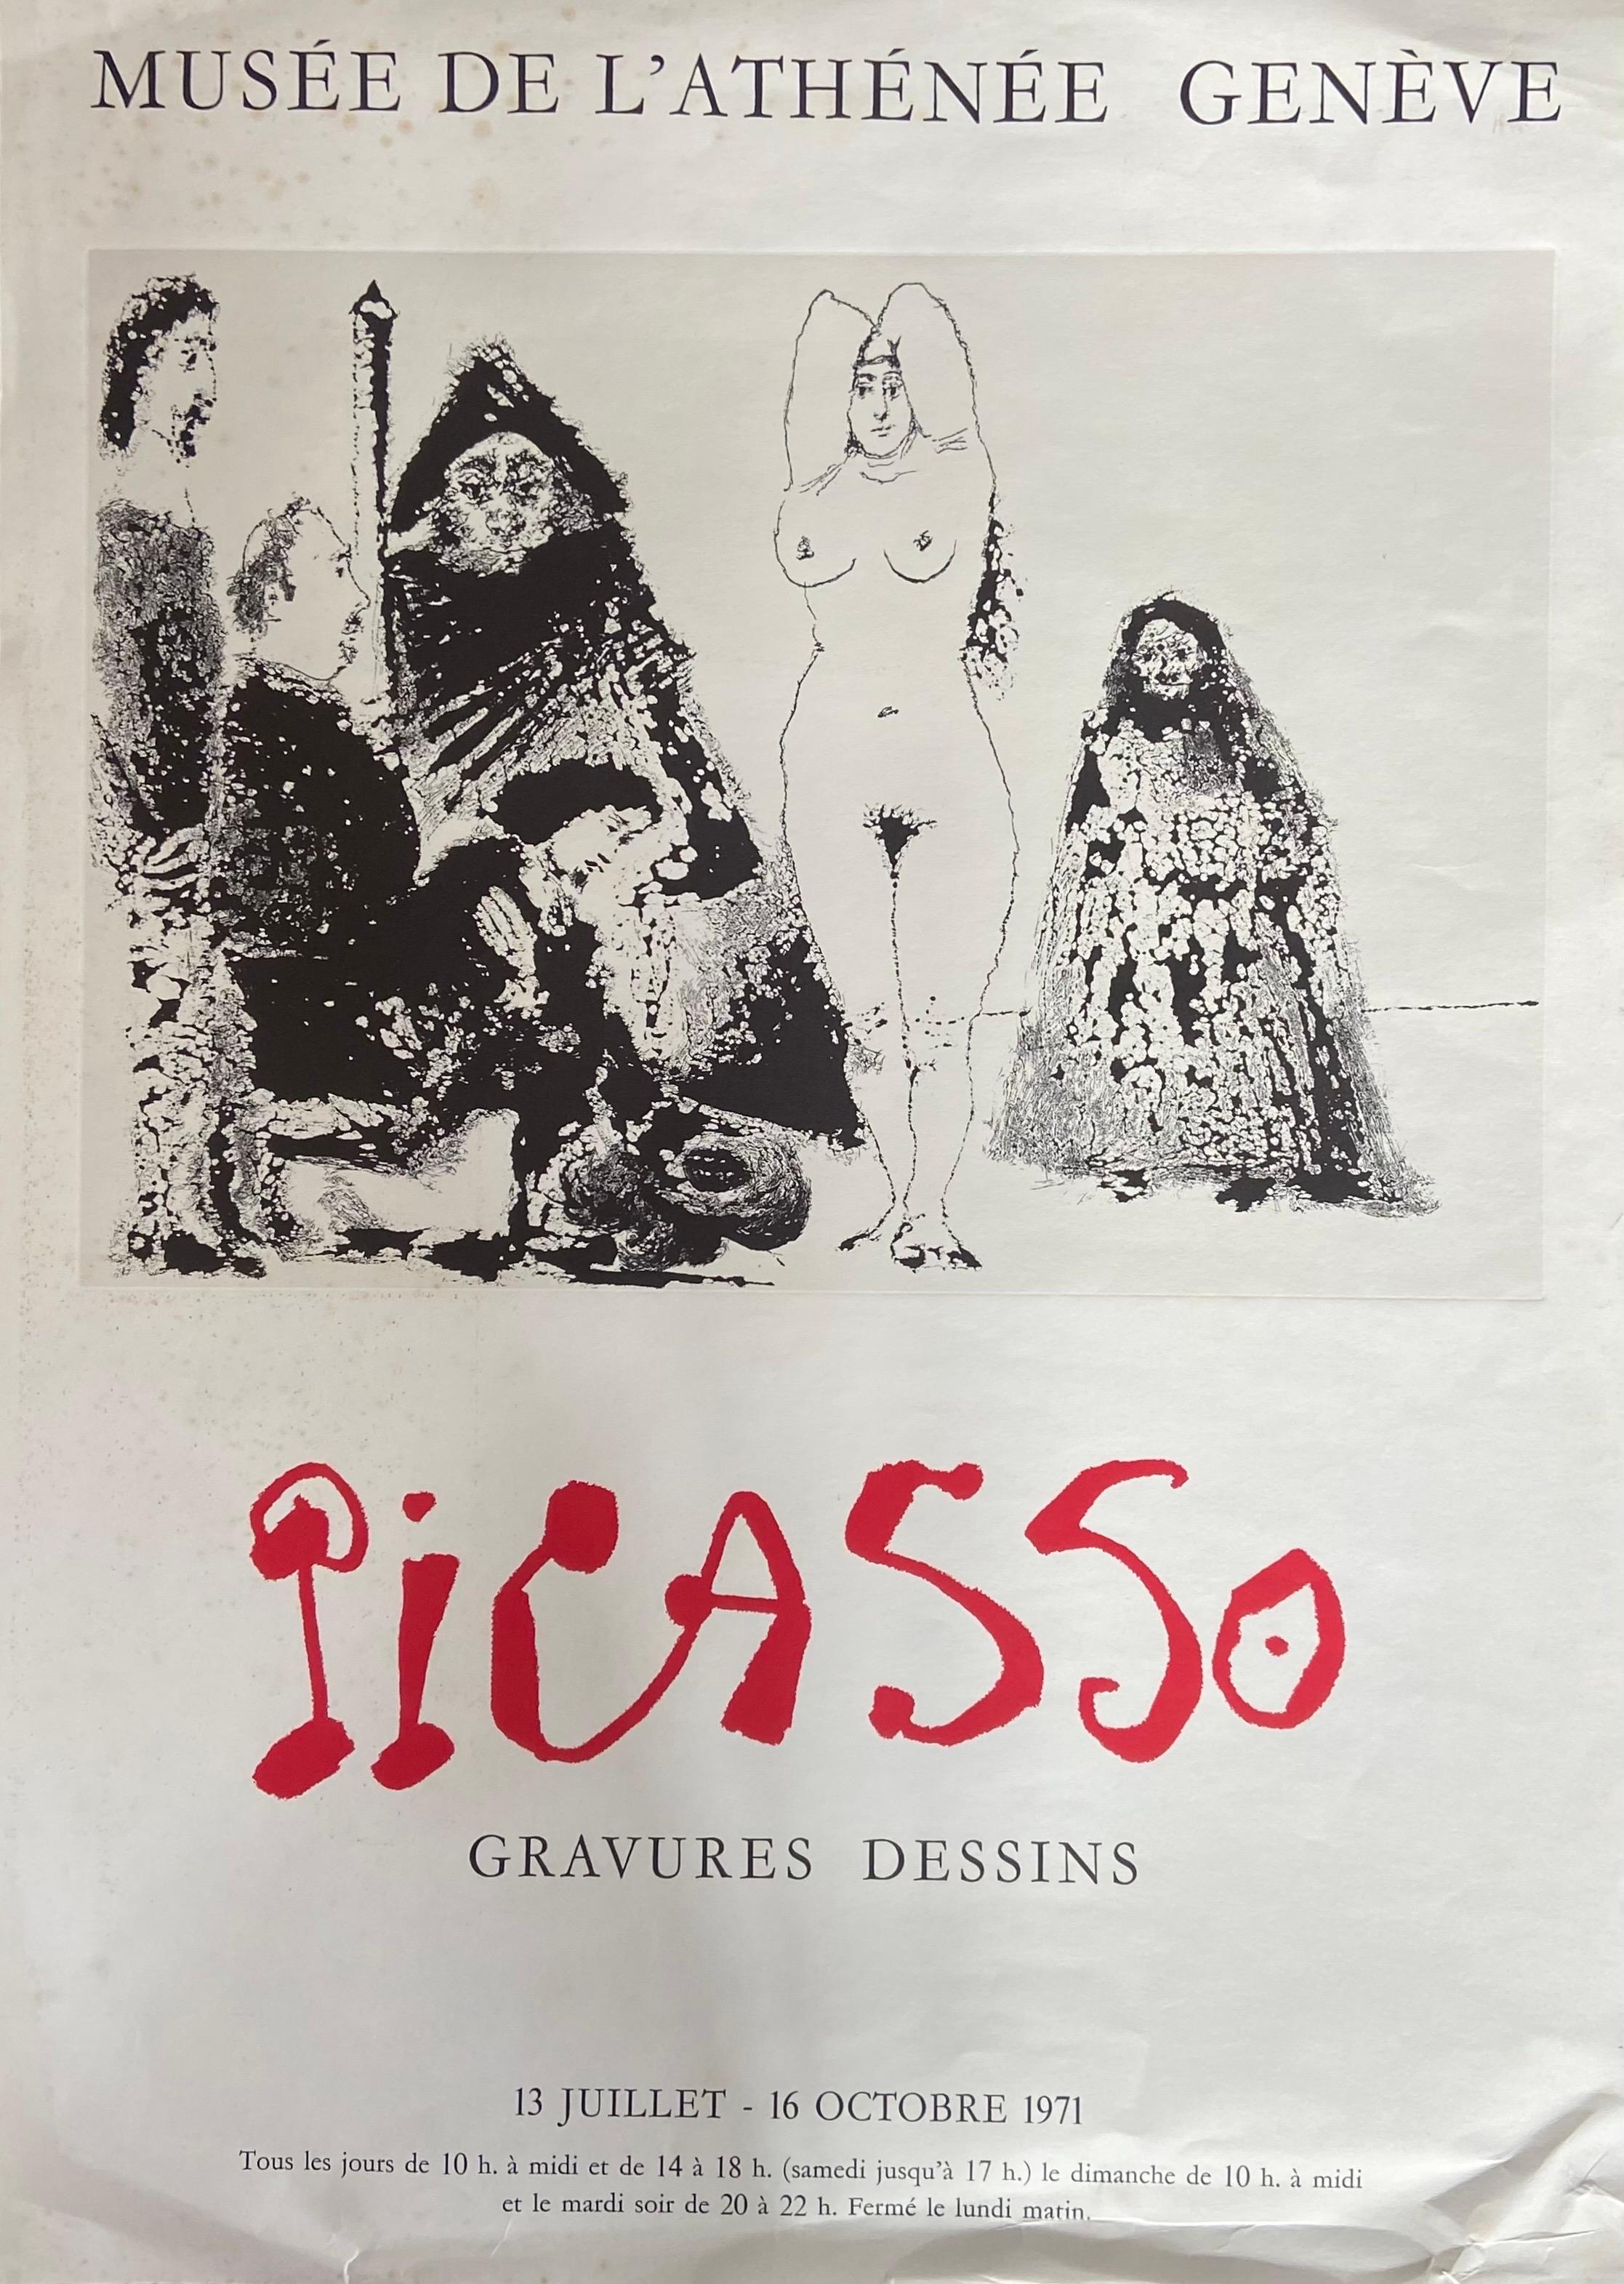 Original Poster for Picasso Exhibition in Geneva back in 1971 For Sale 1